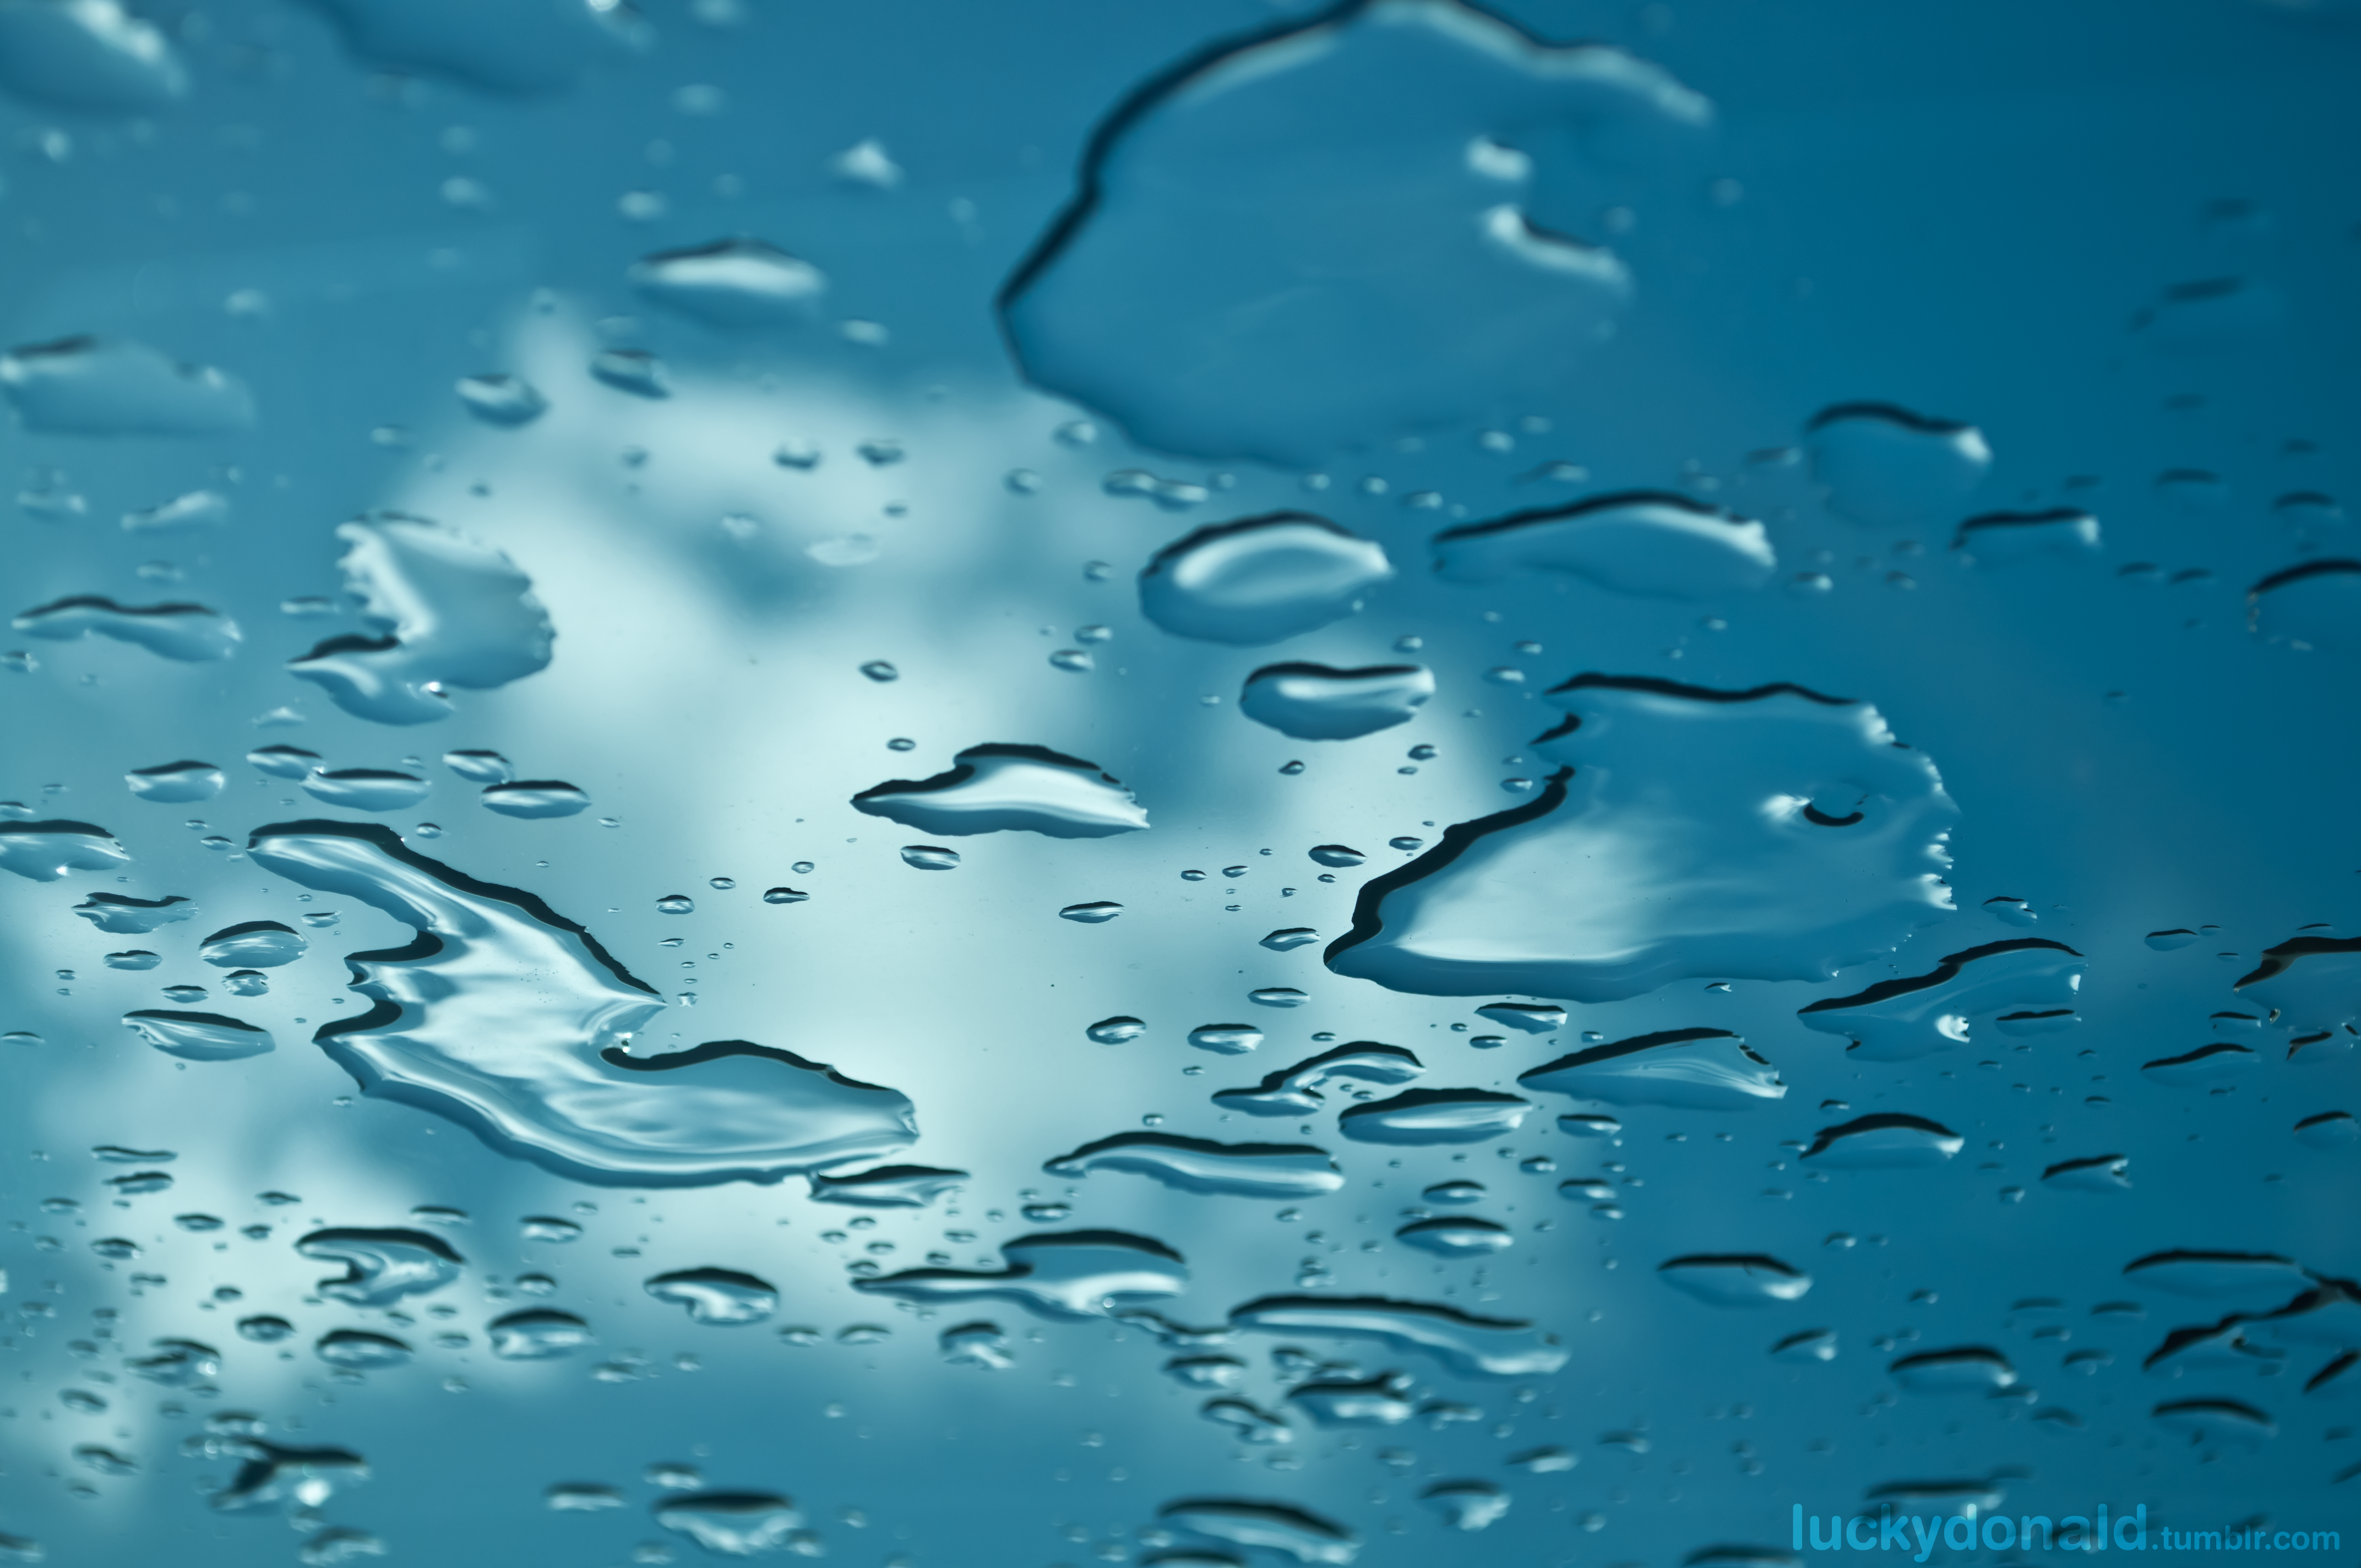 Rained water drops by luckydonald on DeviantArt